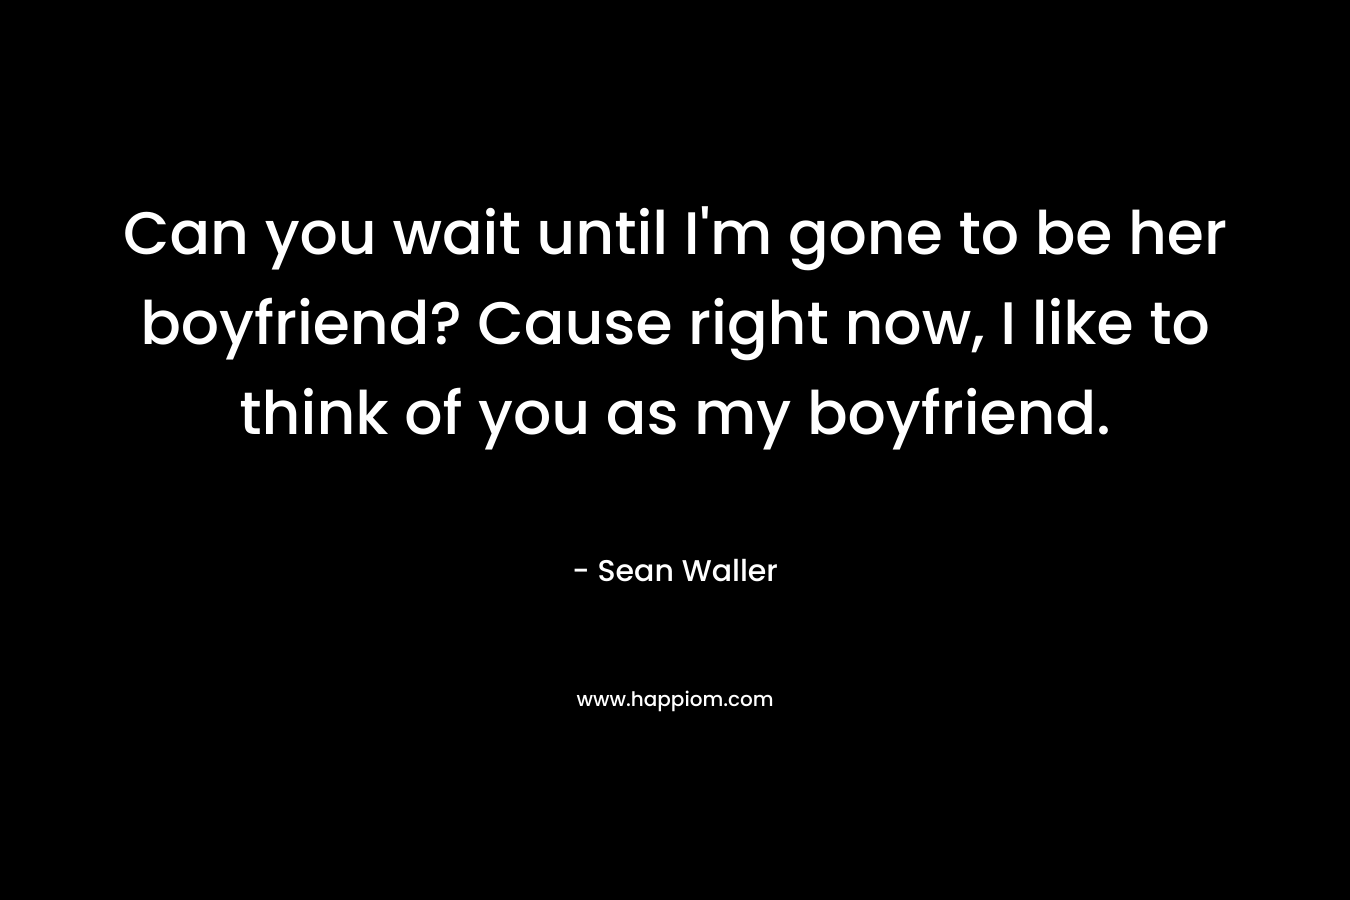 Can you wait until I’m gone to be her boyfriend? Cause right now, I like to think of you as my boyfriend. – Sean Waller